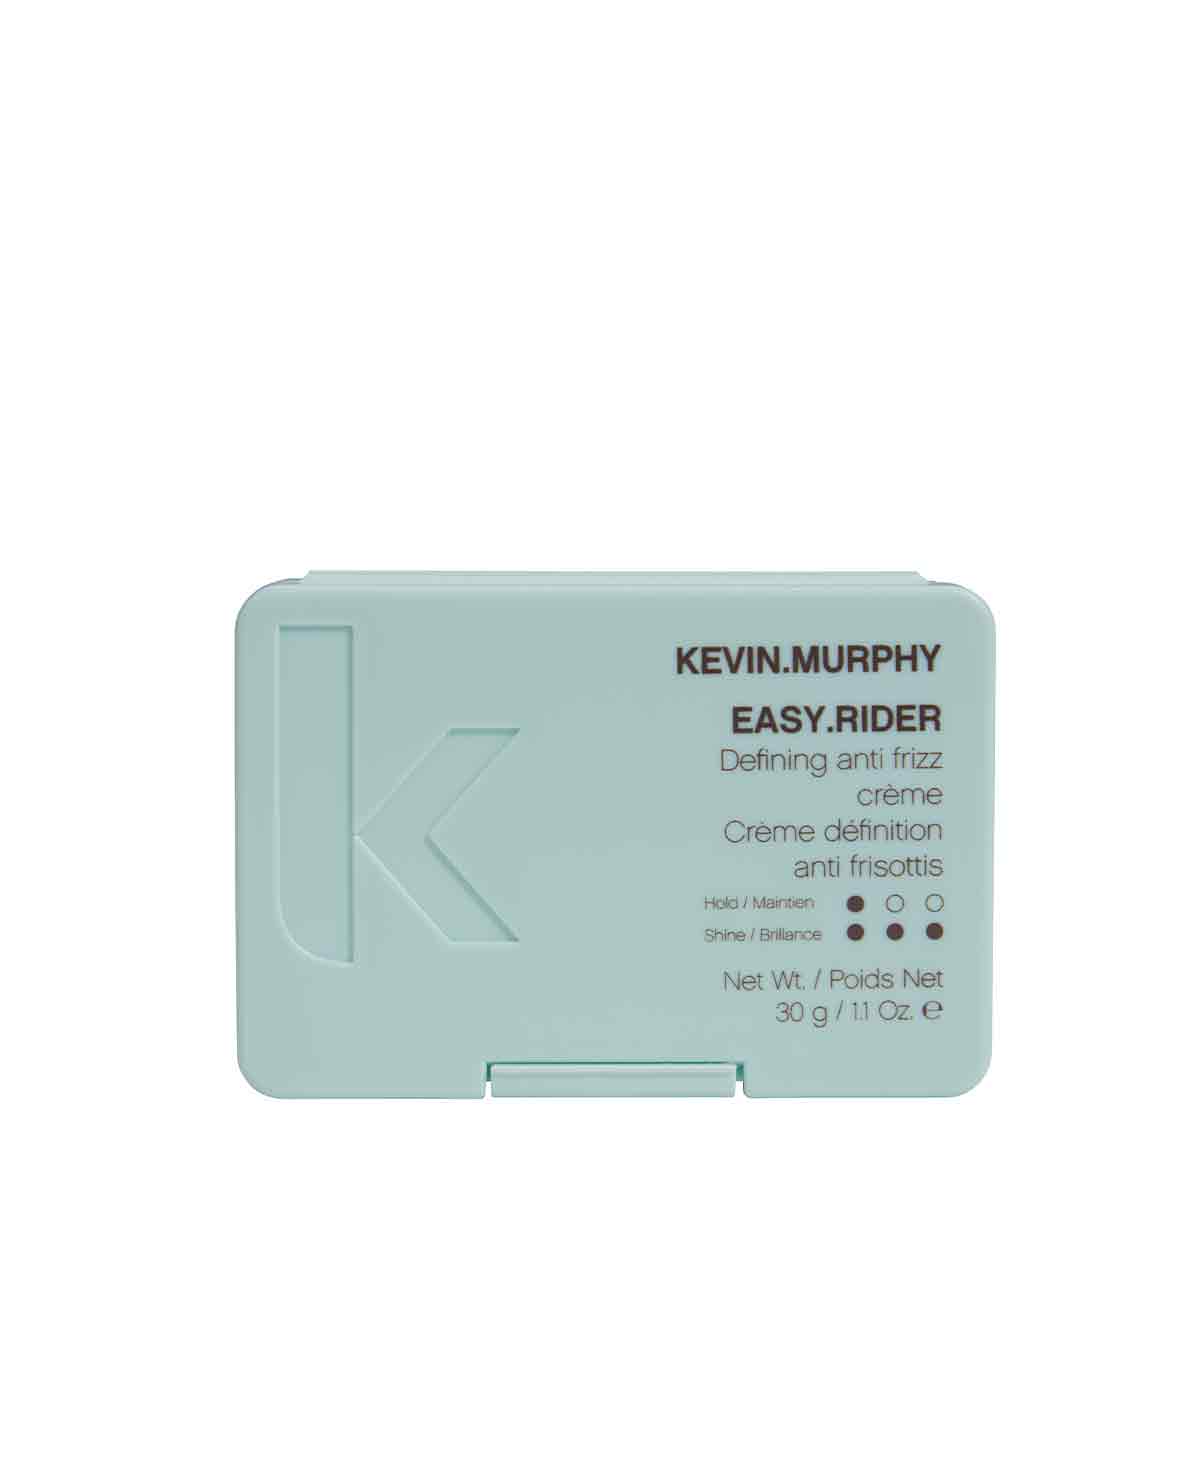 Kevin.Murphy EASY.RIDER 30g